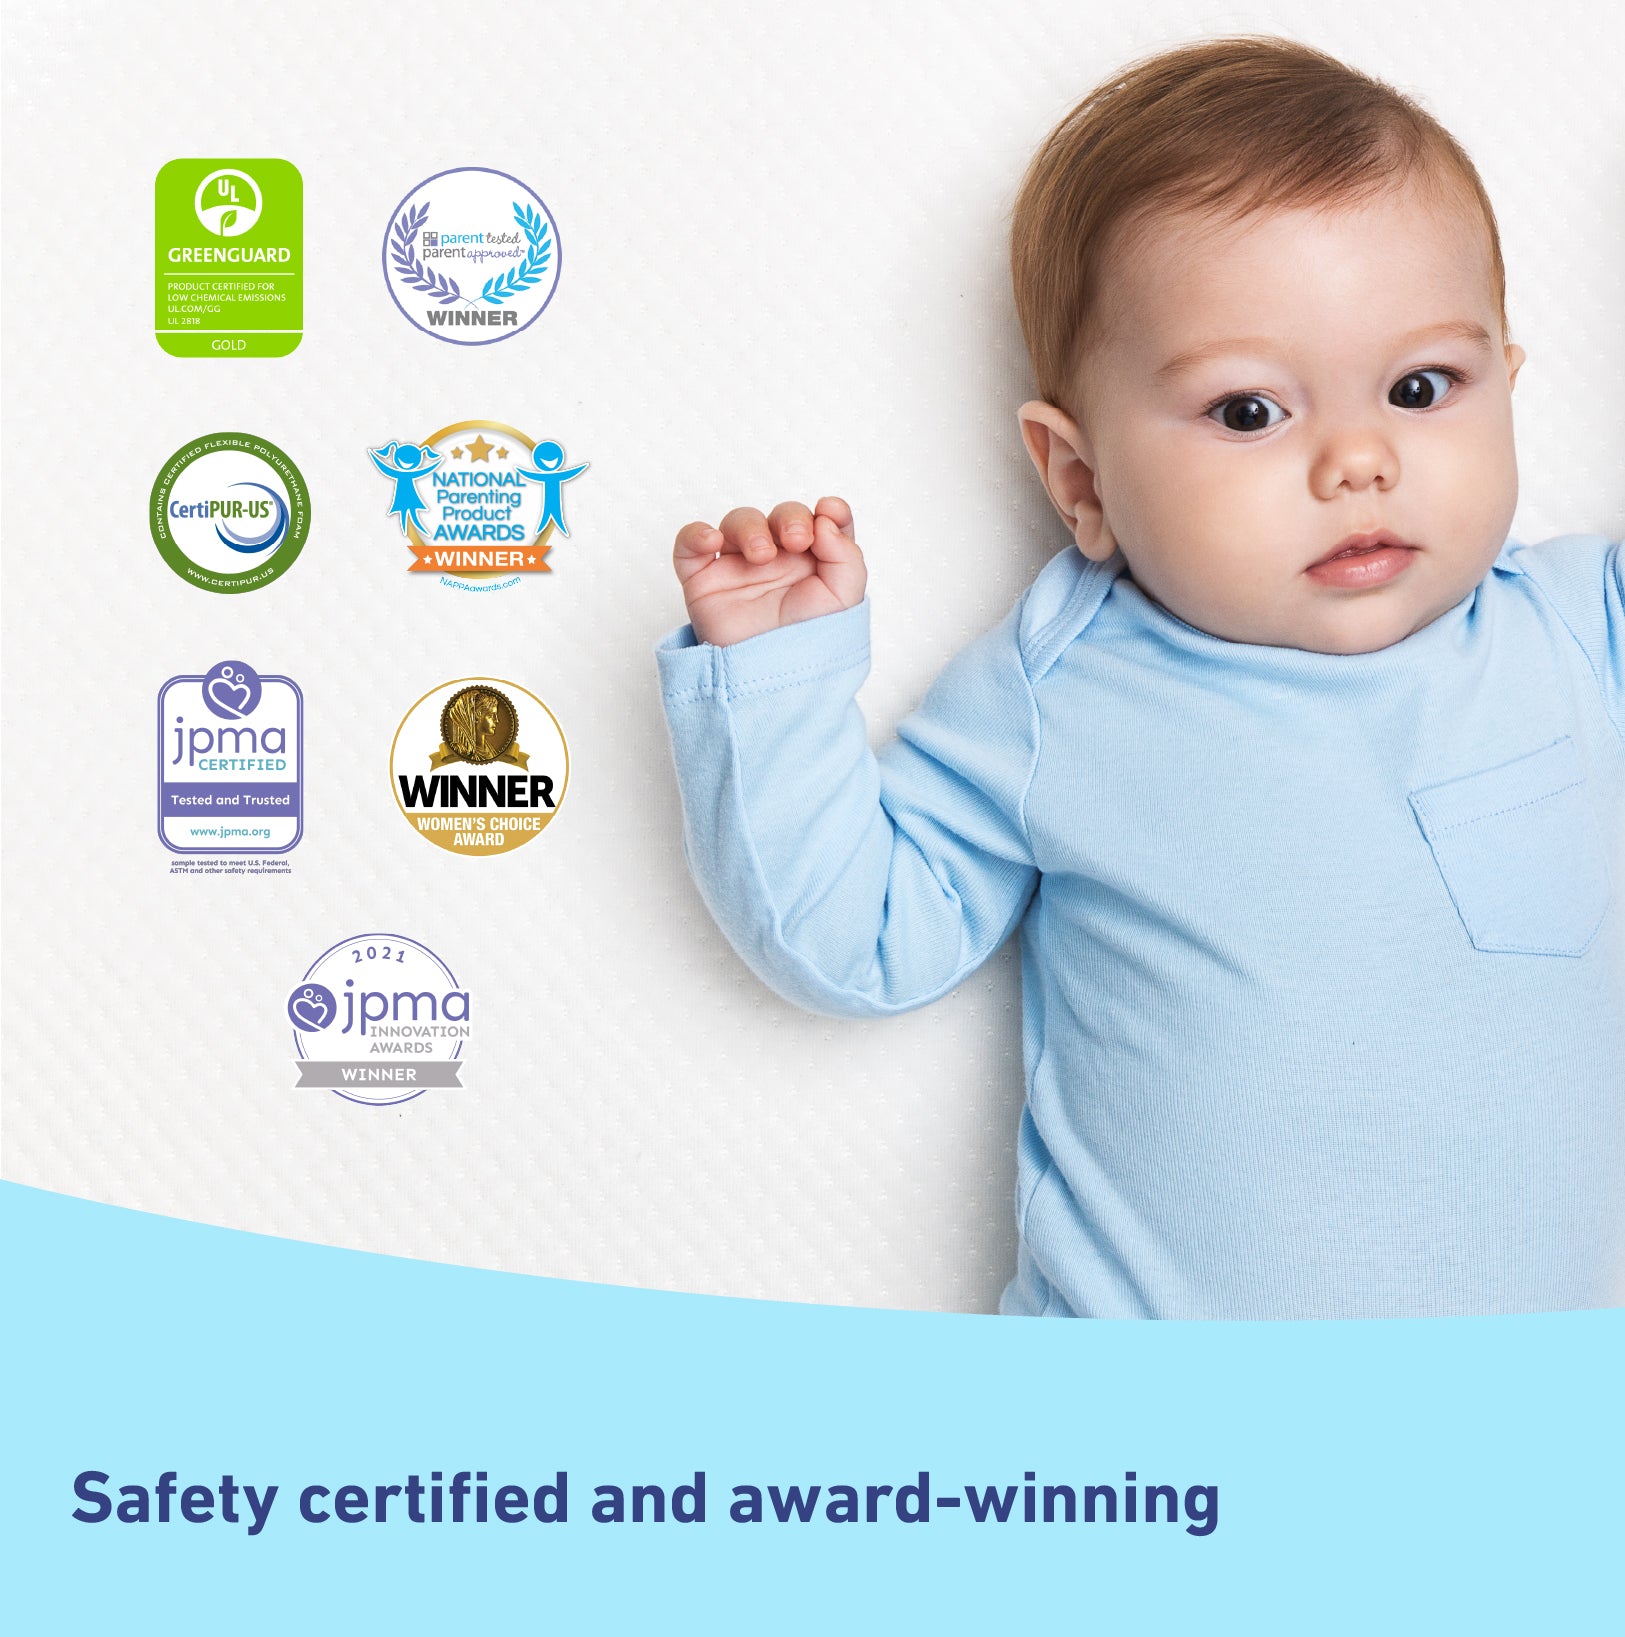 baby mattress awards and safety certifications graphic